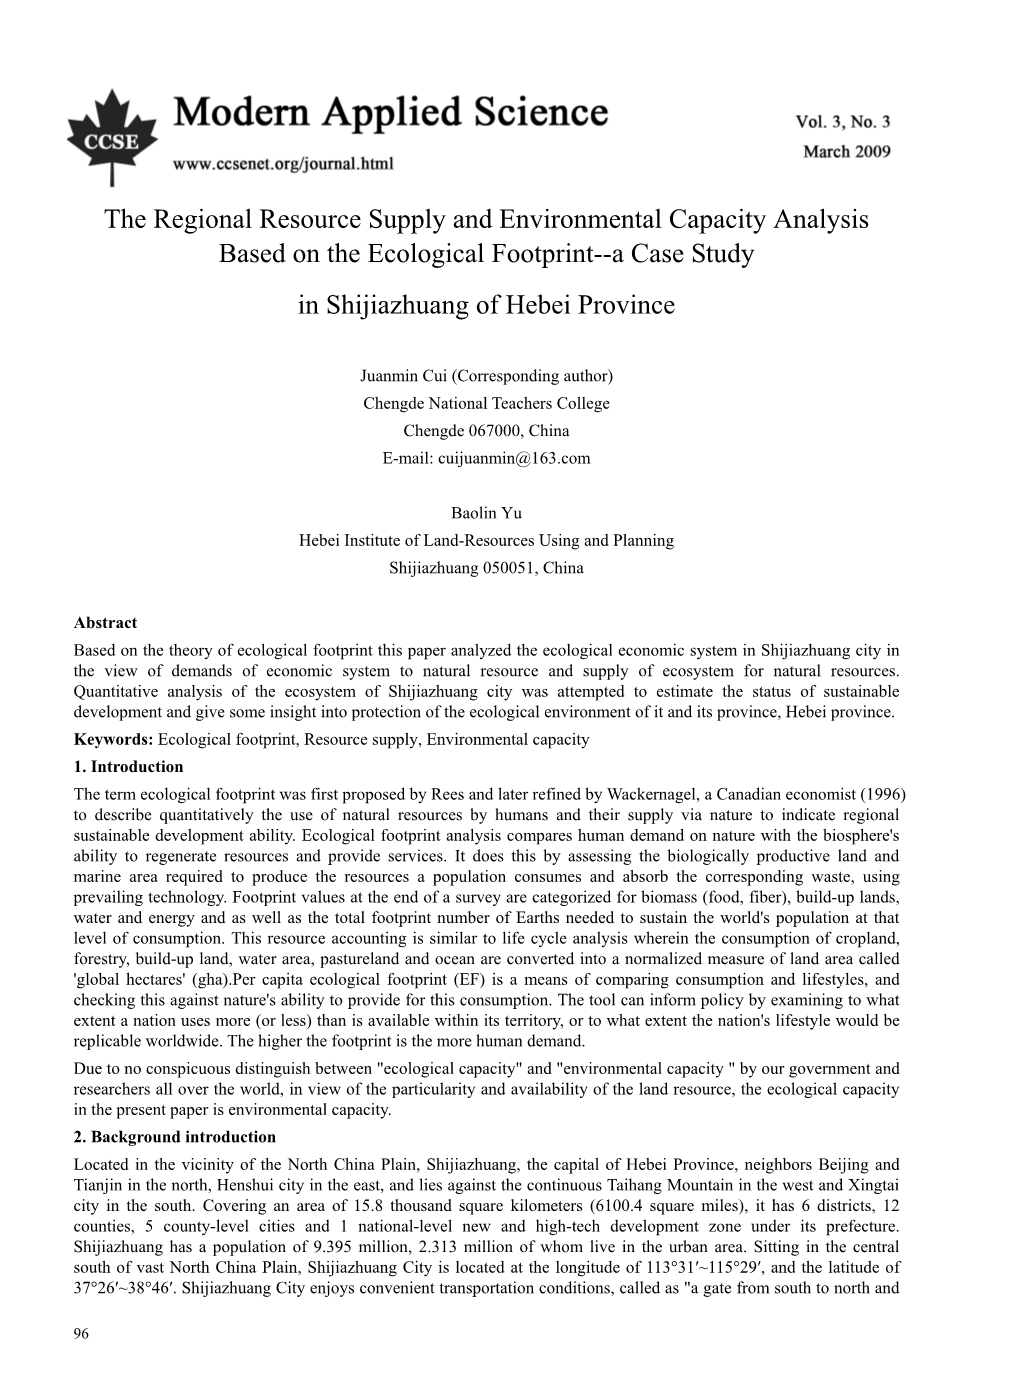 The Regional Resource Supply and Environmental Capacity Analysis Based on the Ecological Footprint--A Case Study in Shijiazhuan